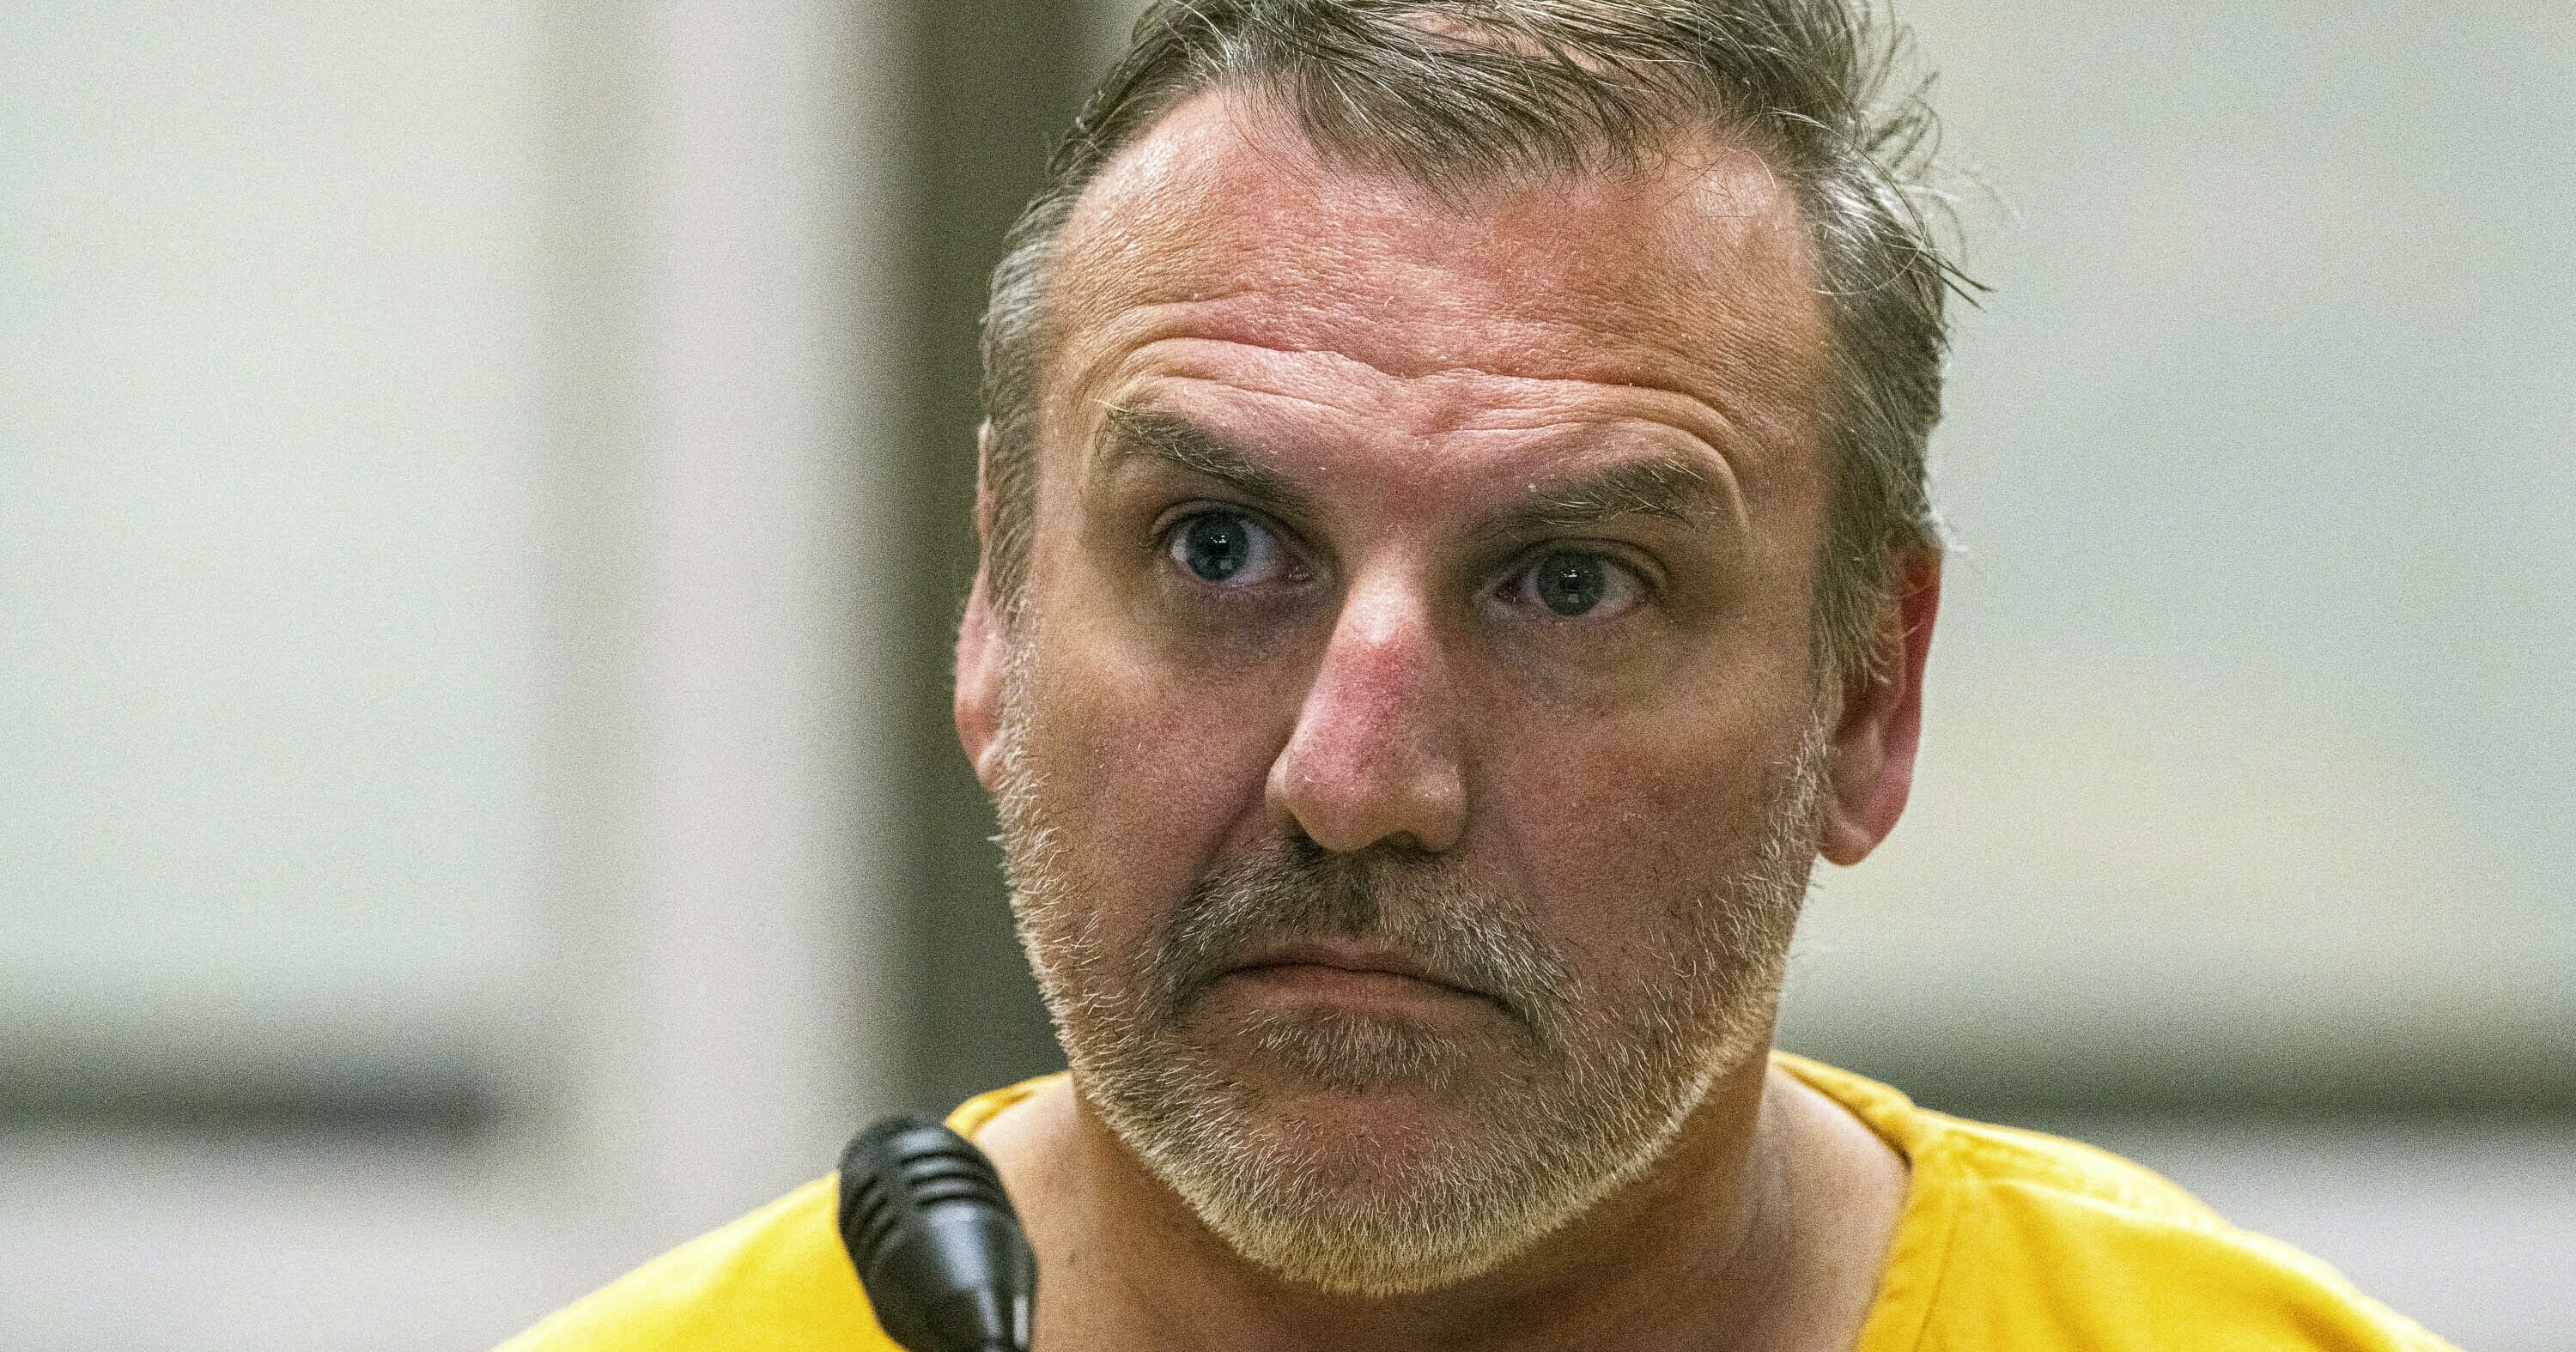 Brian Steven Smith attends his arraignment on a charge of first-degree murder in Anchorage, Alaska.